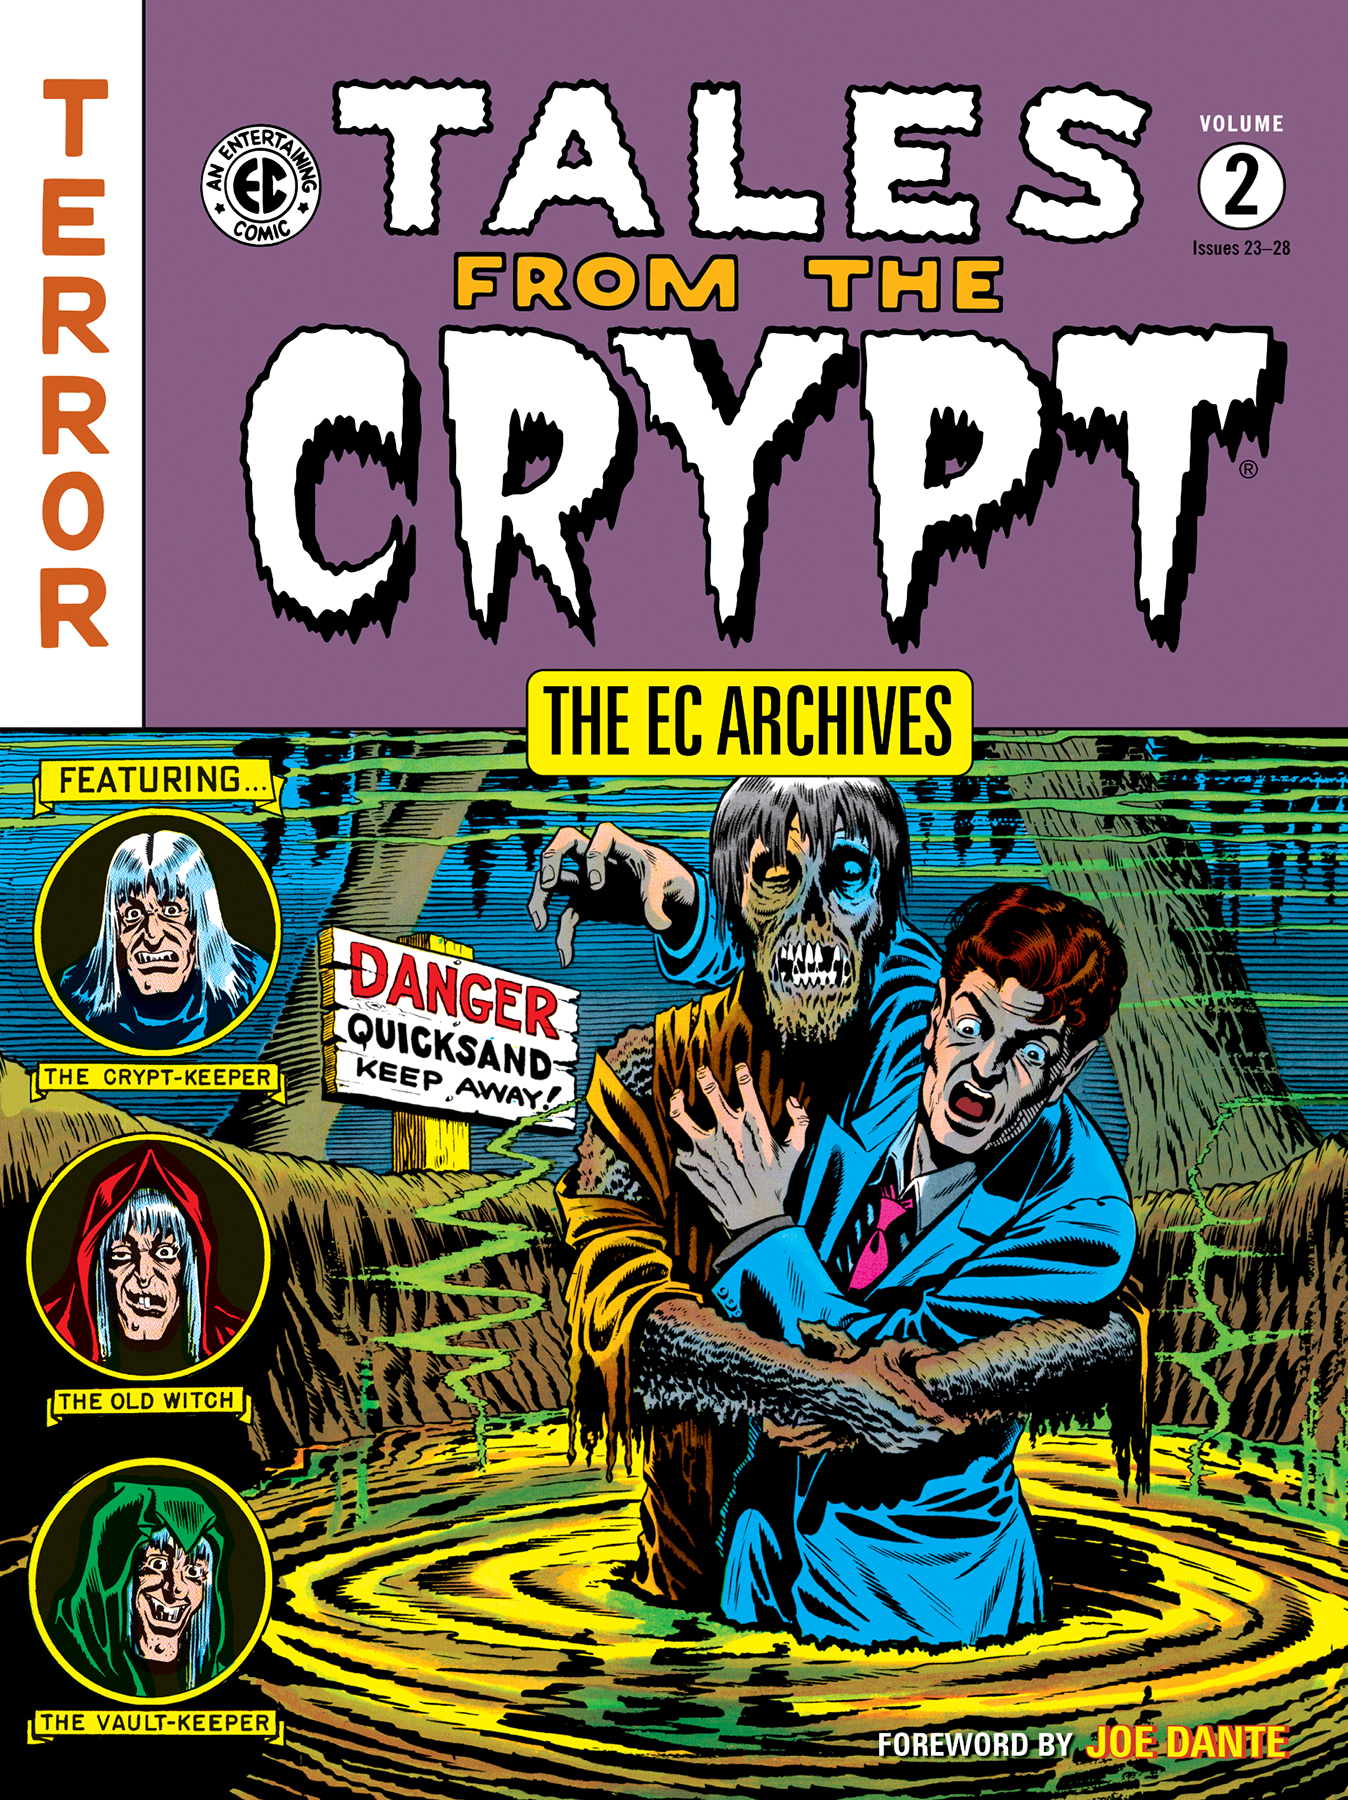 EC Archives Tales From The Crypt Graphic Novel Volume 2